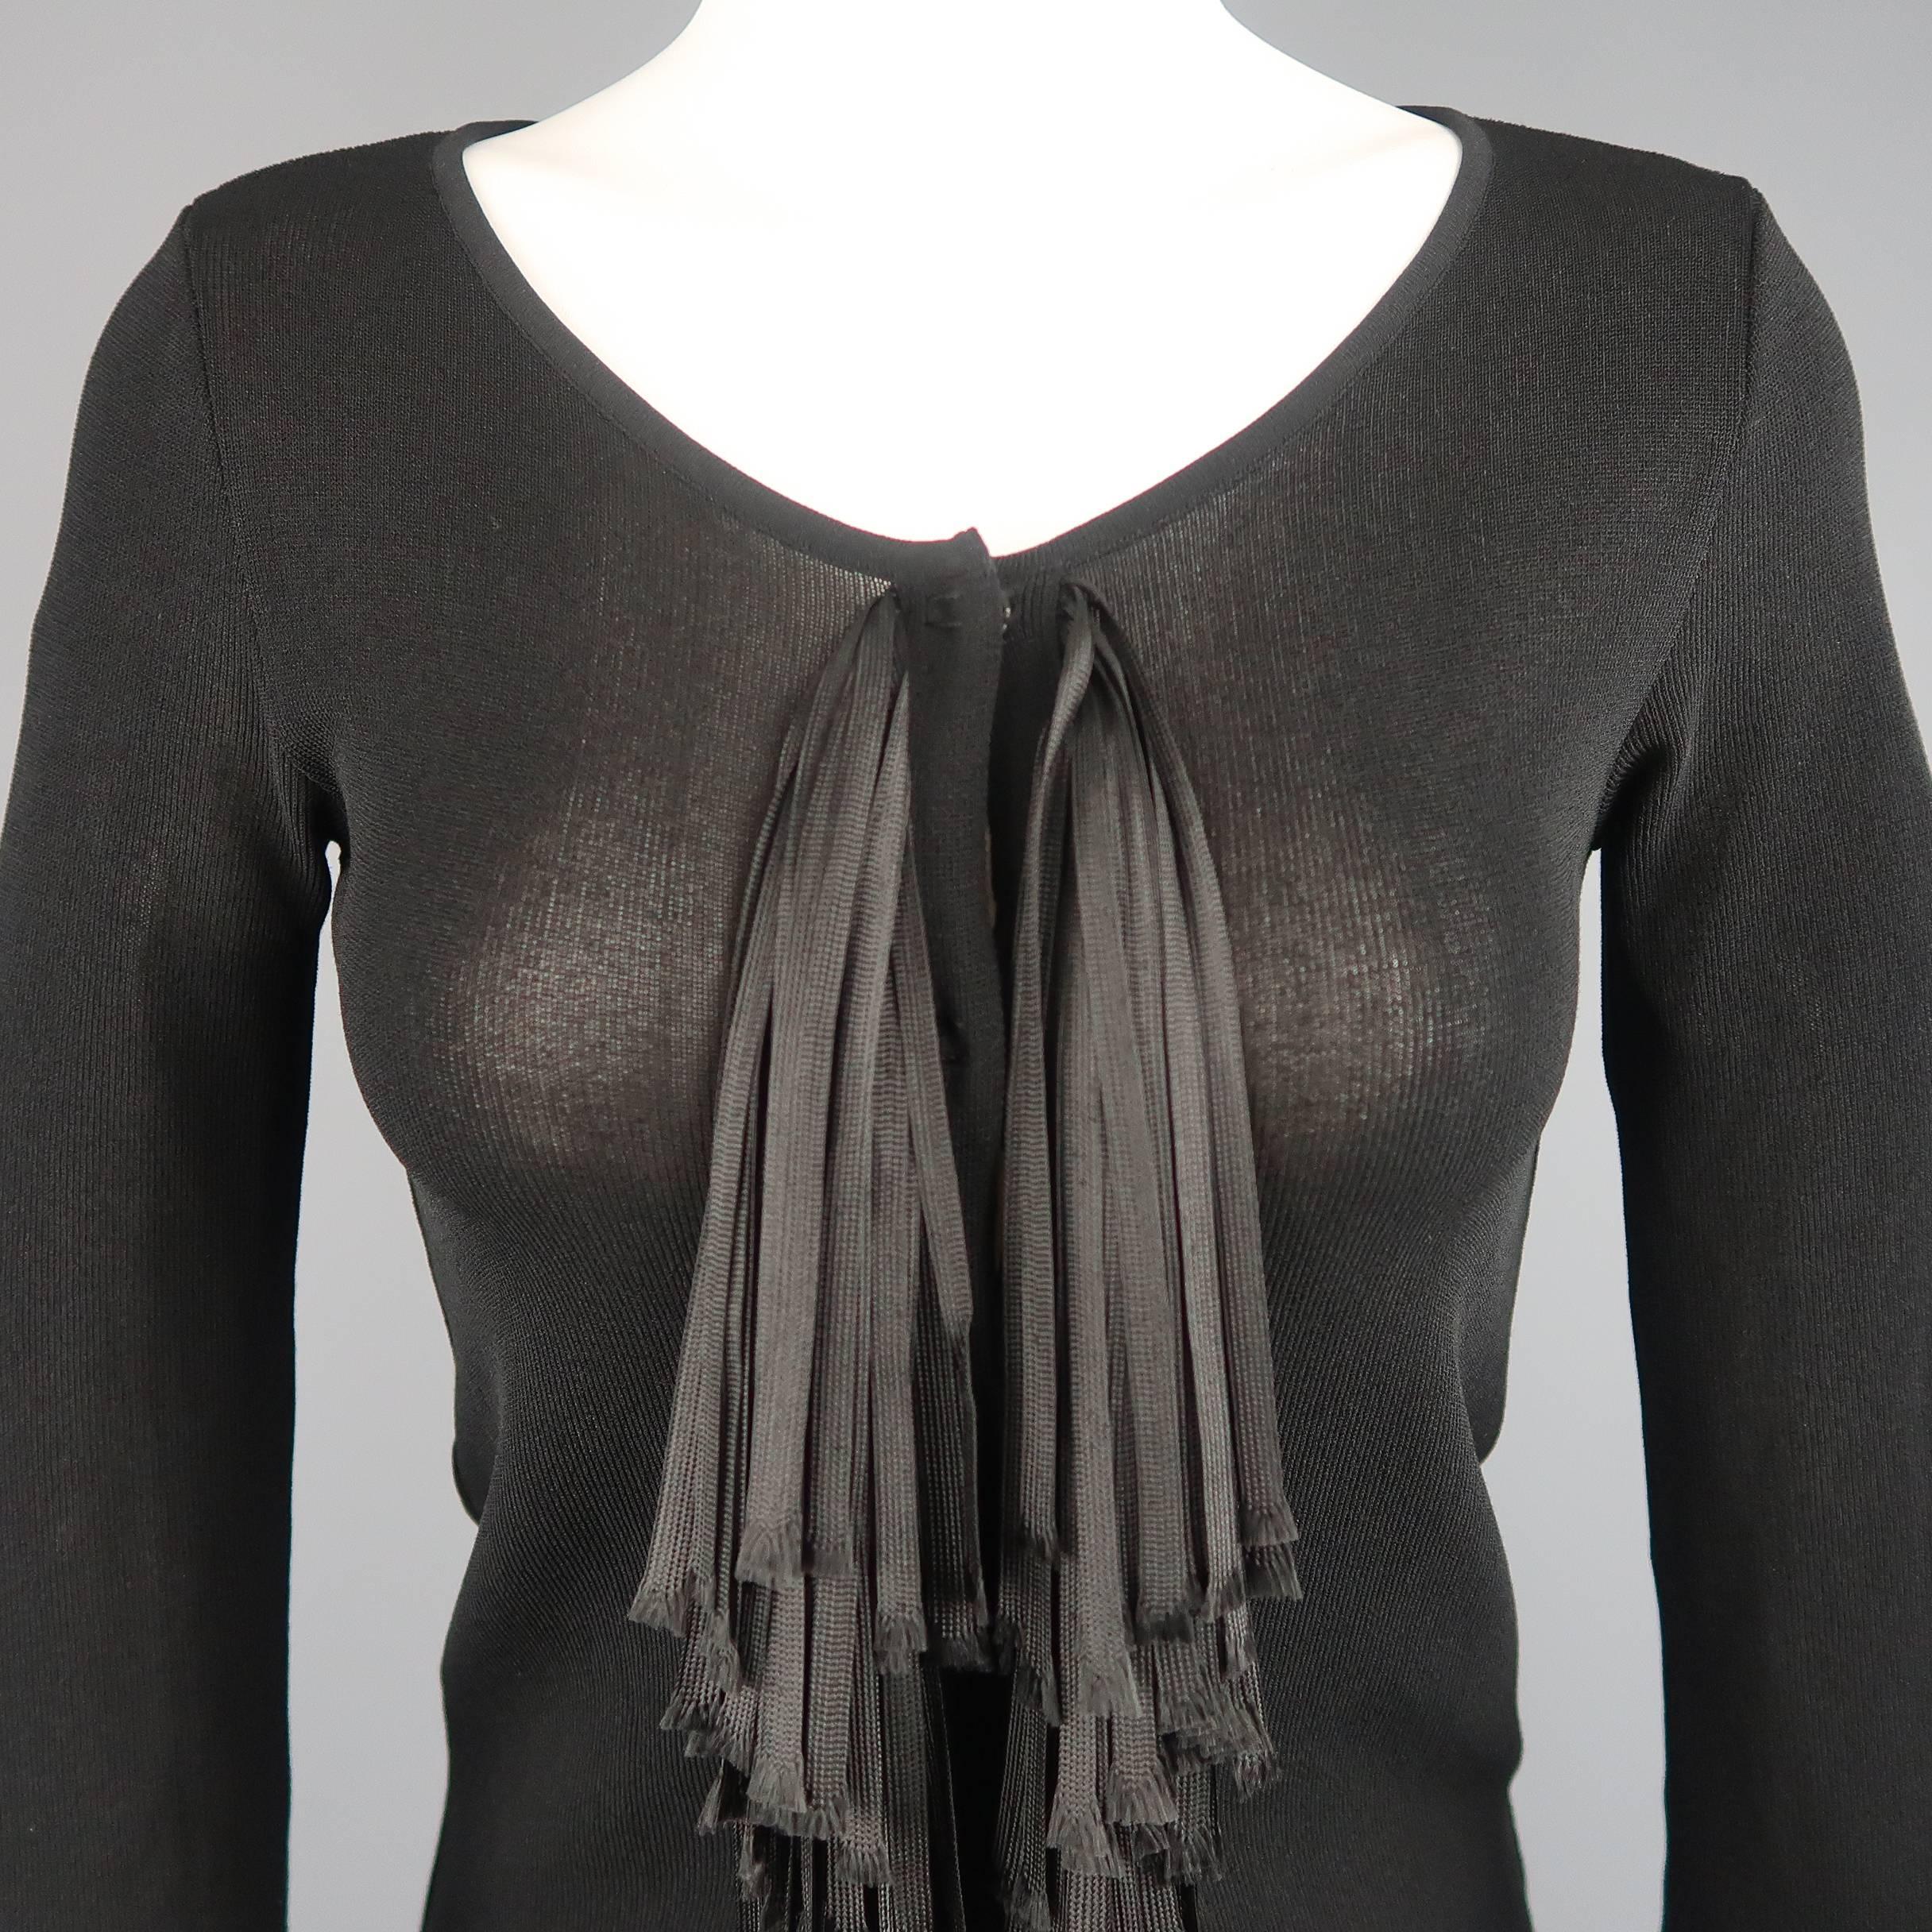 This Giambattista Valli cardigan comes in a sheer black knit and features a round scoop neck, three quarter sleeves, hidden placket snap closure front, and layered raw edge ribbon fringe down the front. Made In Italy.
 
Excellent Pre-Owned